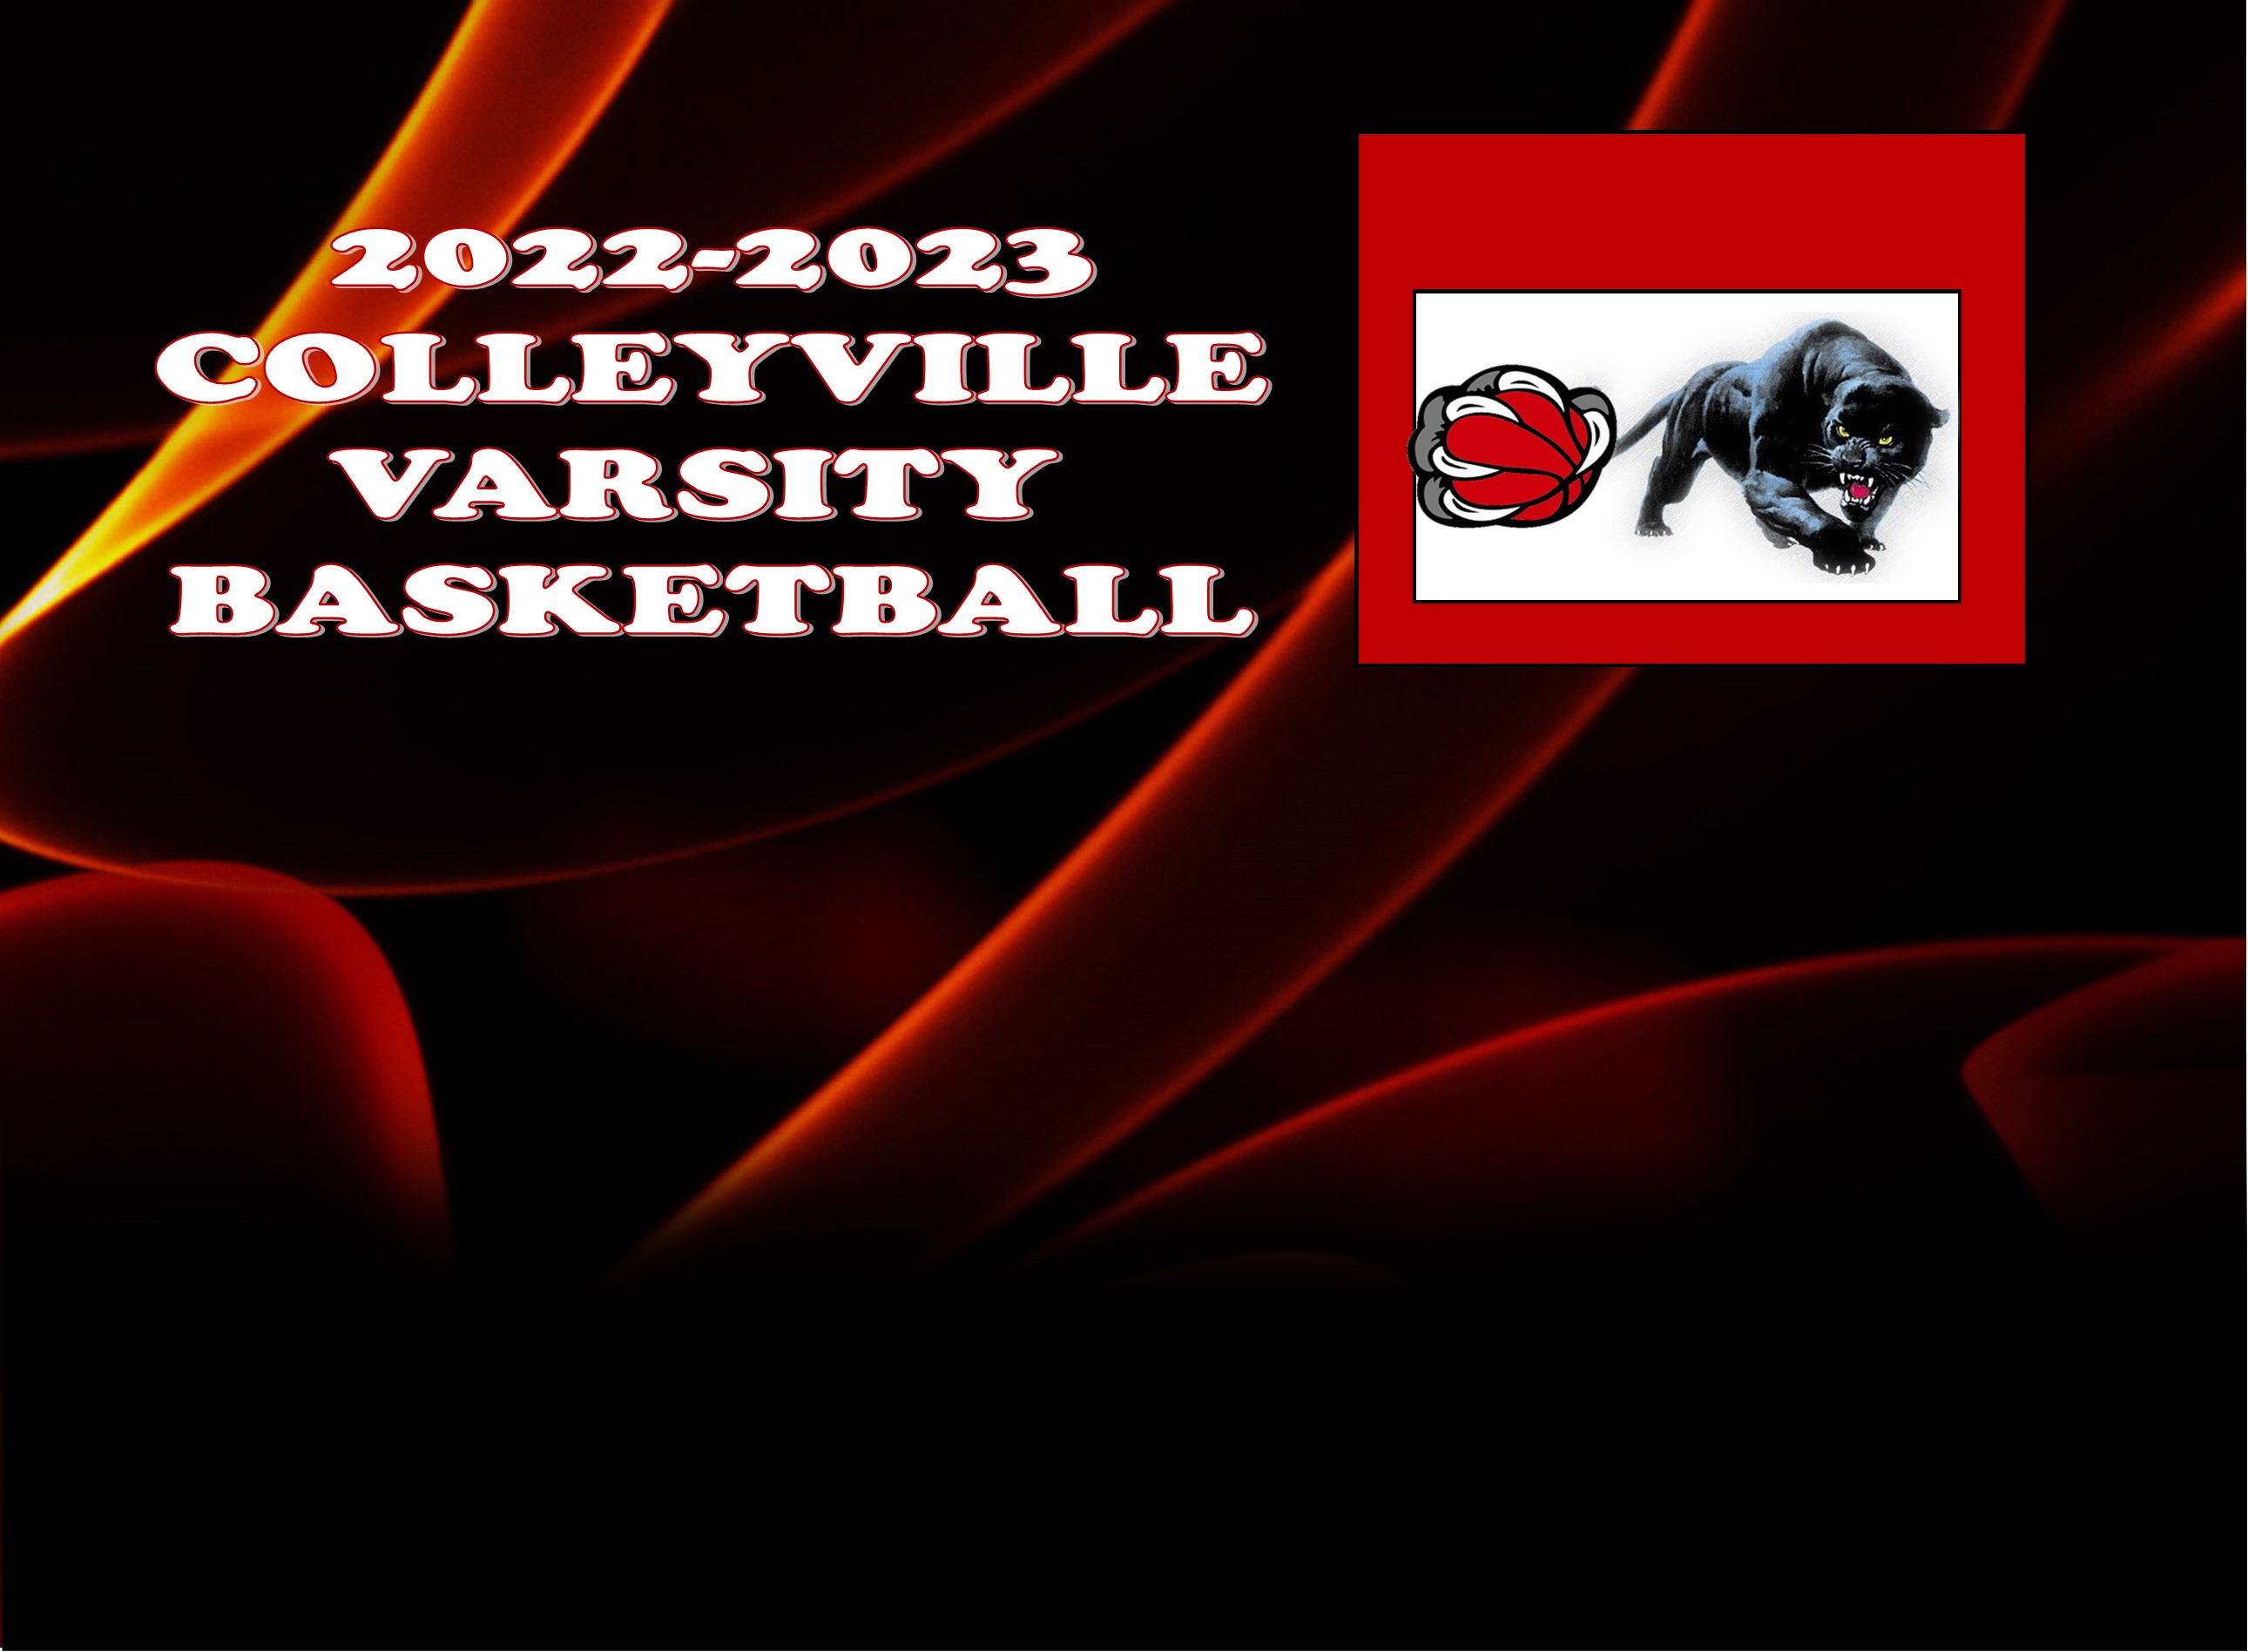 GCISD Varsity Basketball: Colleyville Lady Panthers Defeat Grapevine Lady Mustangs 52-27